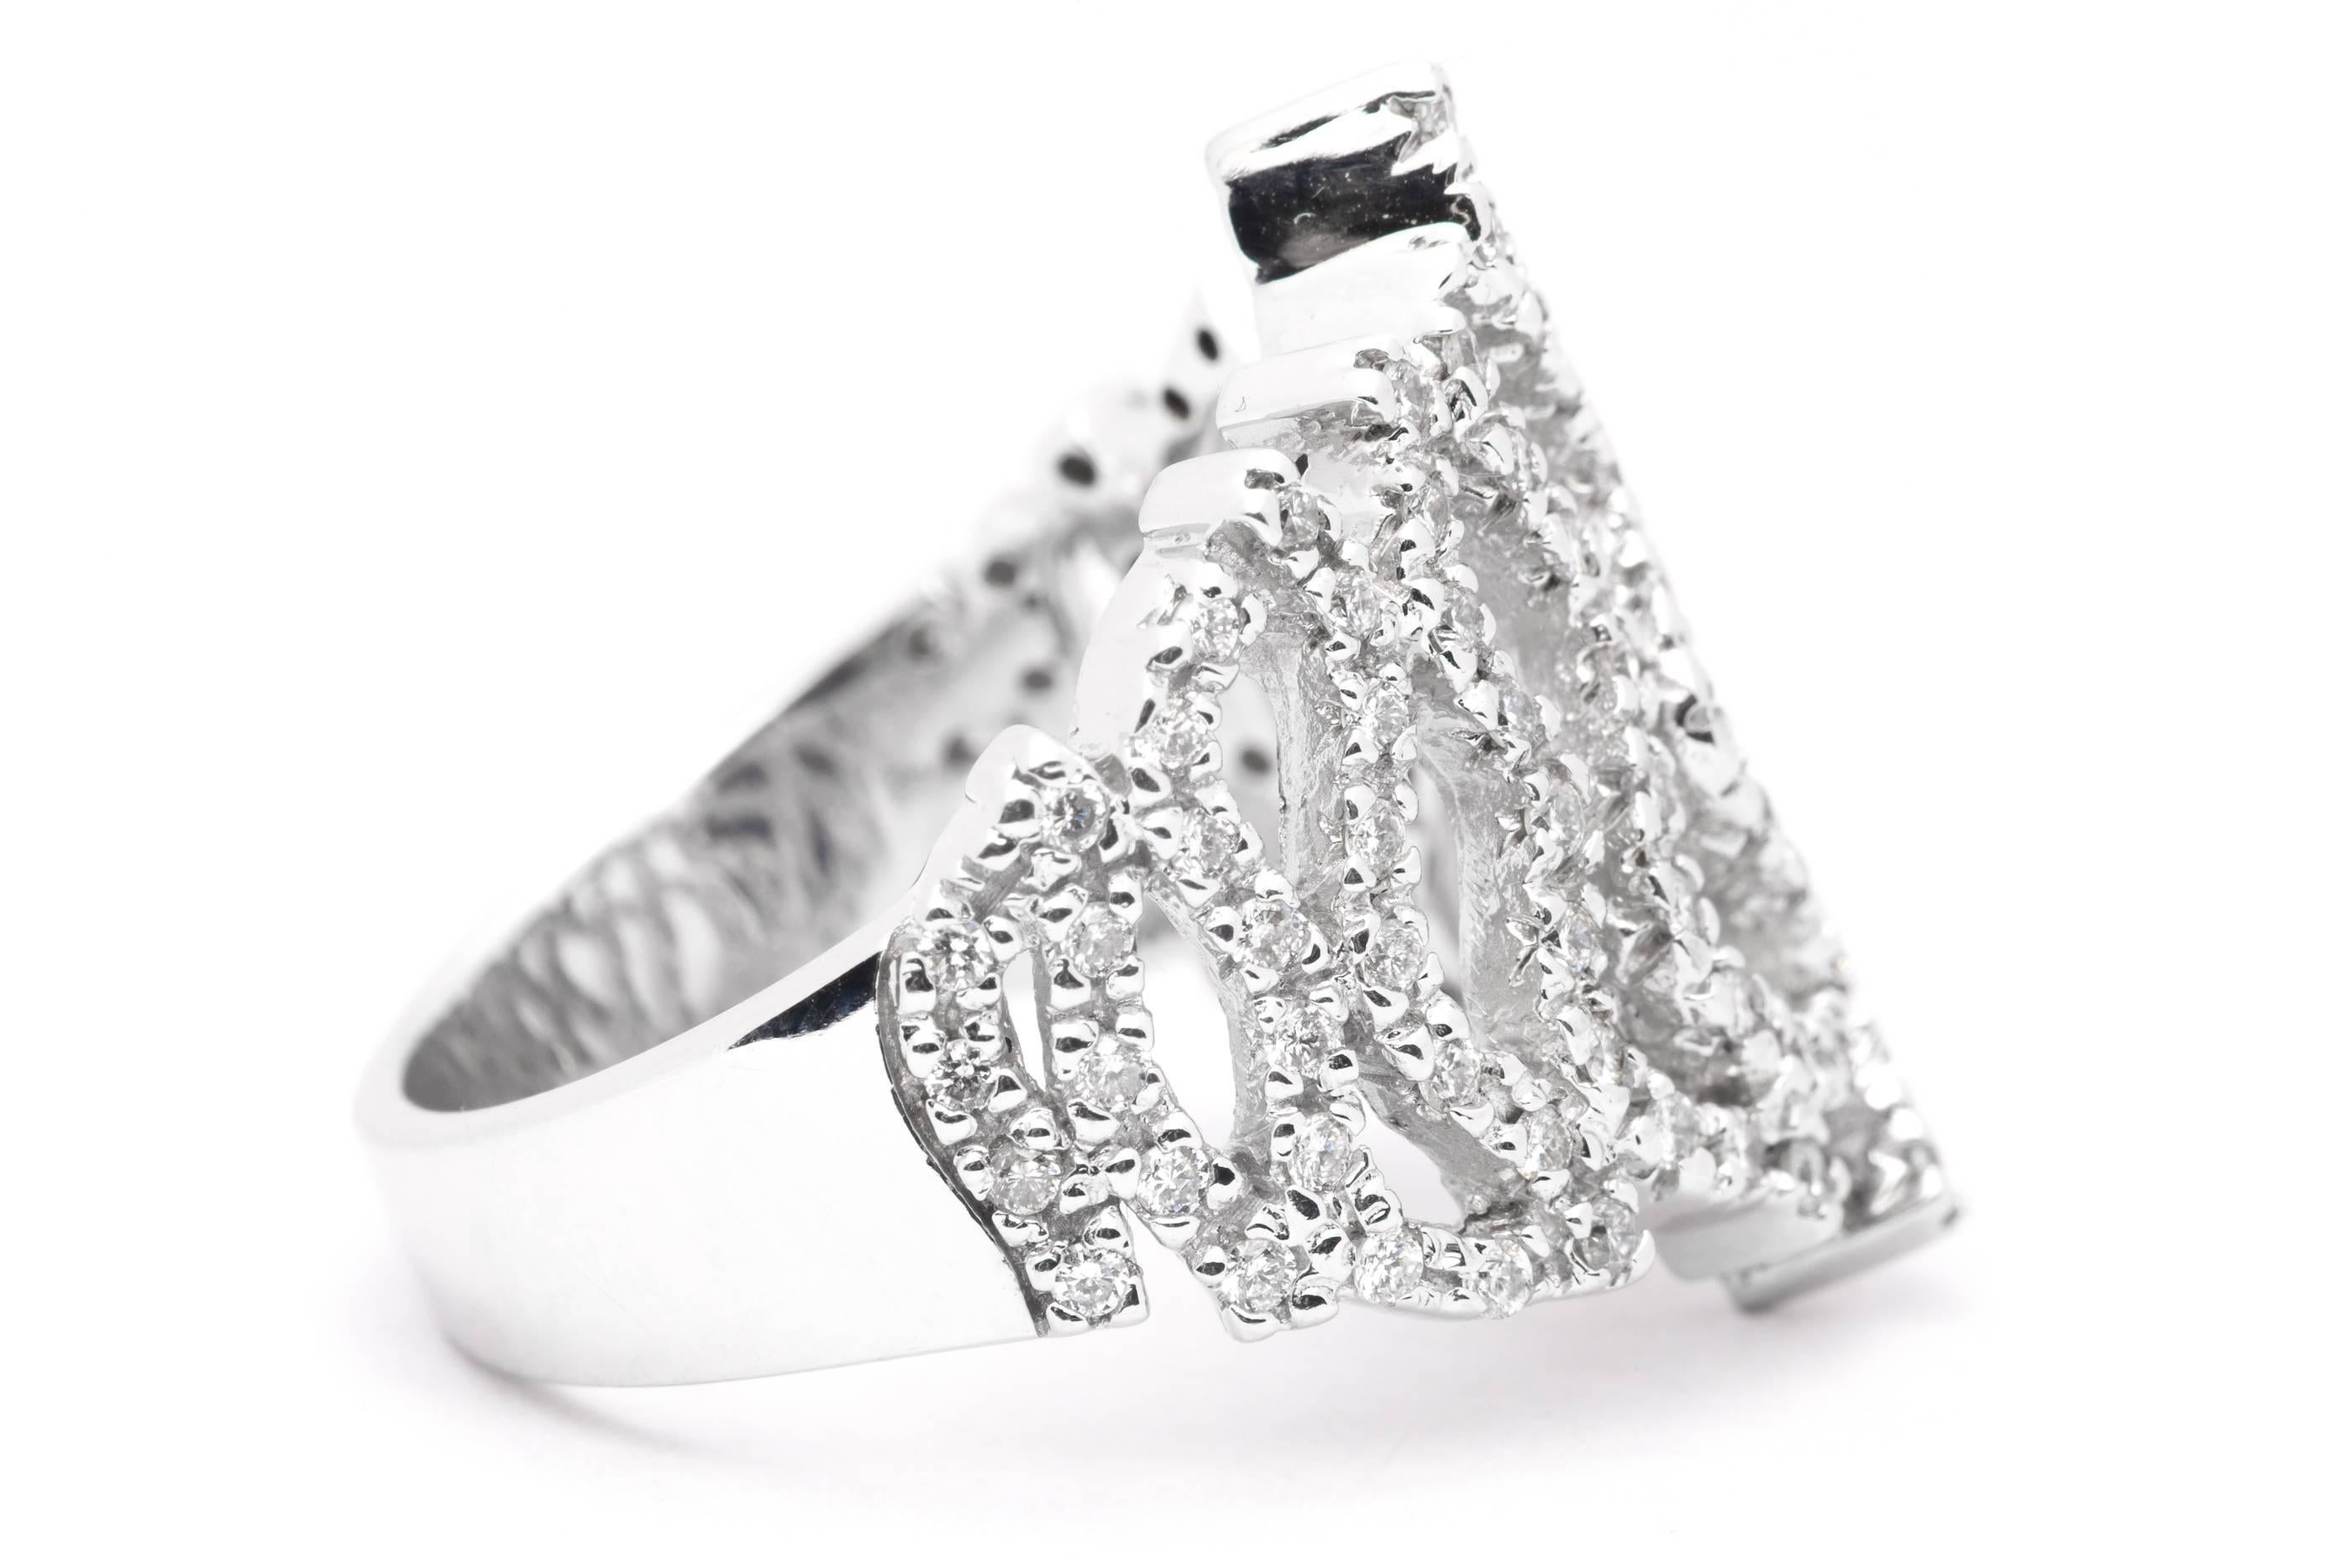 Women's Abstract Diamond Cocktail Ring For Sale